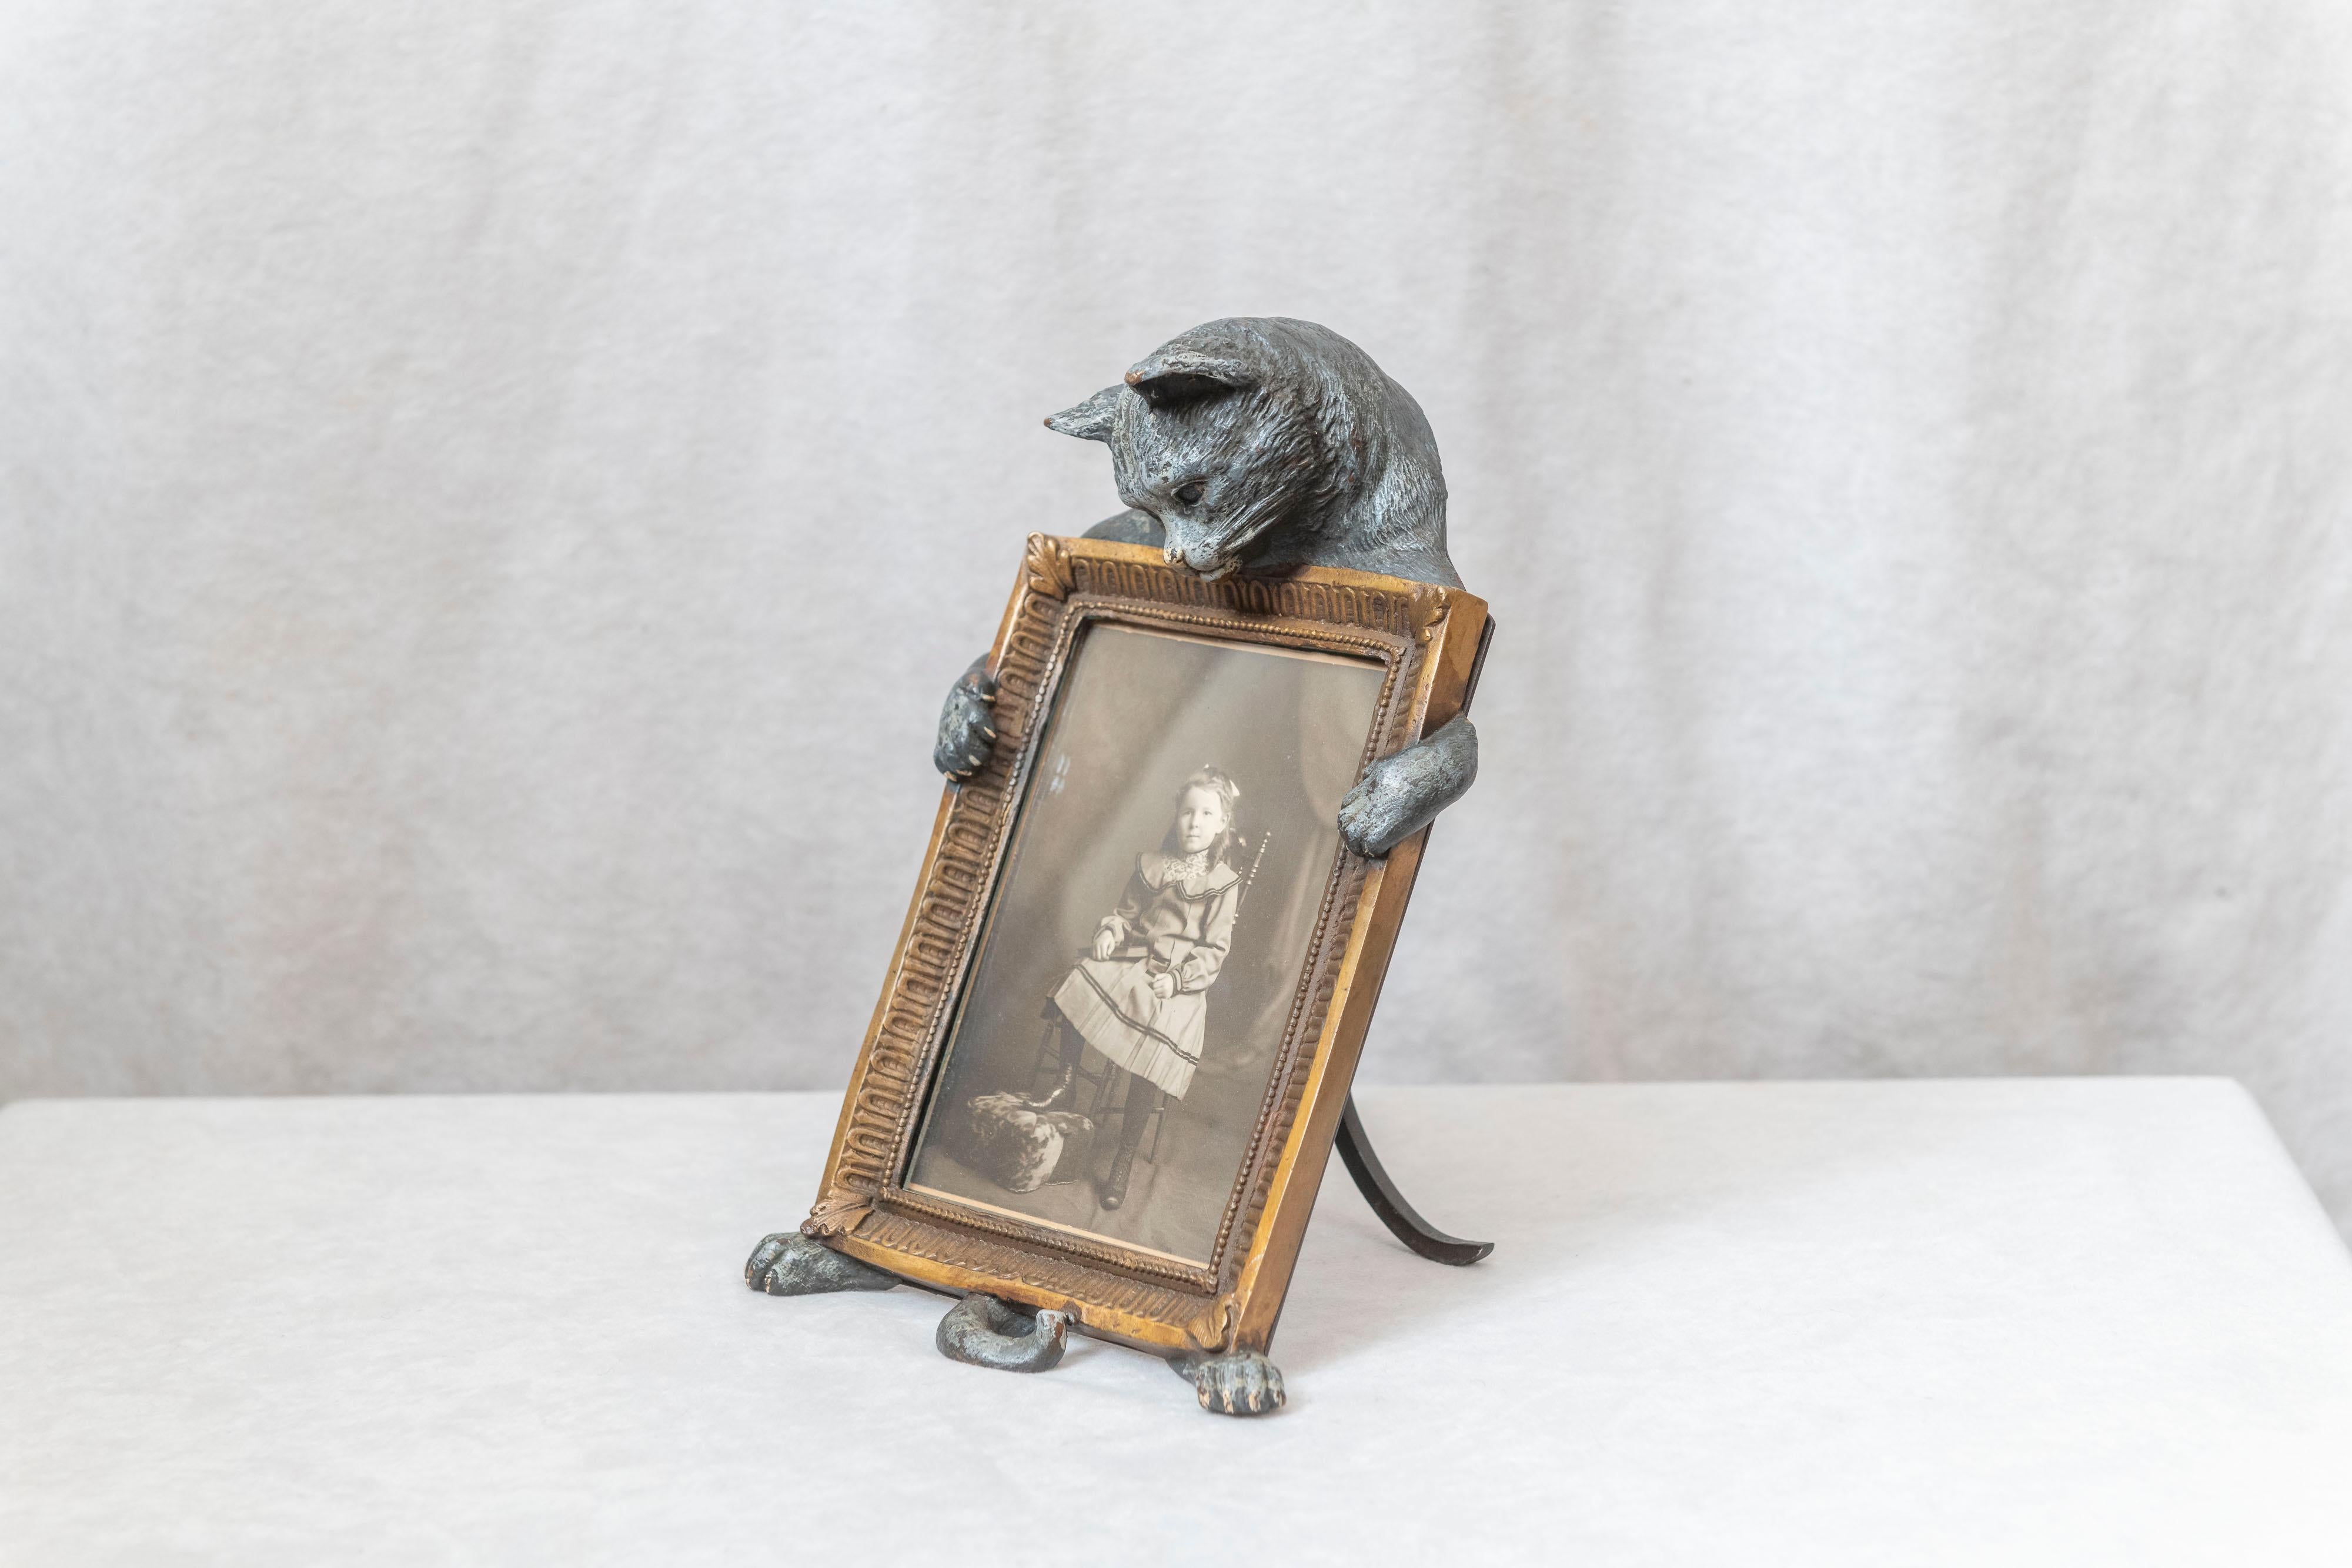 This wonderful and whimsical picture frame is why we carry Vienna bronzes in our gallery. This well modeled and meticulously painted piece is a fine example of the ingenious and artistic bronzes that were produced in Austria way back in the early